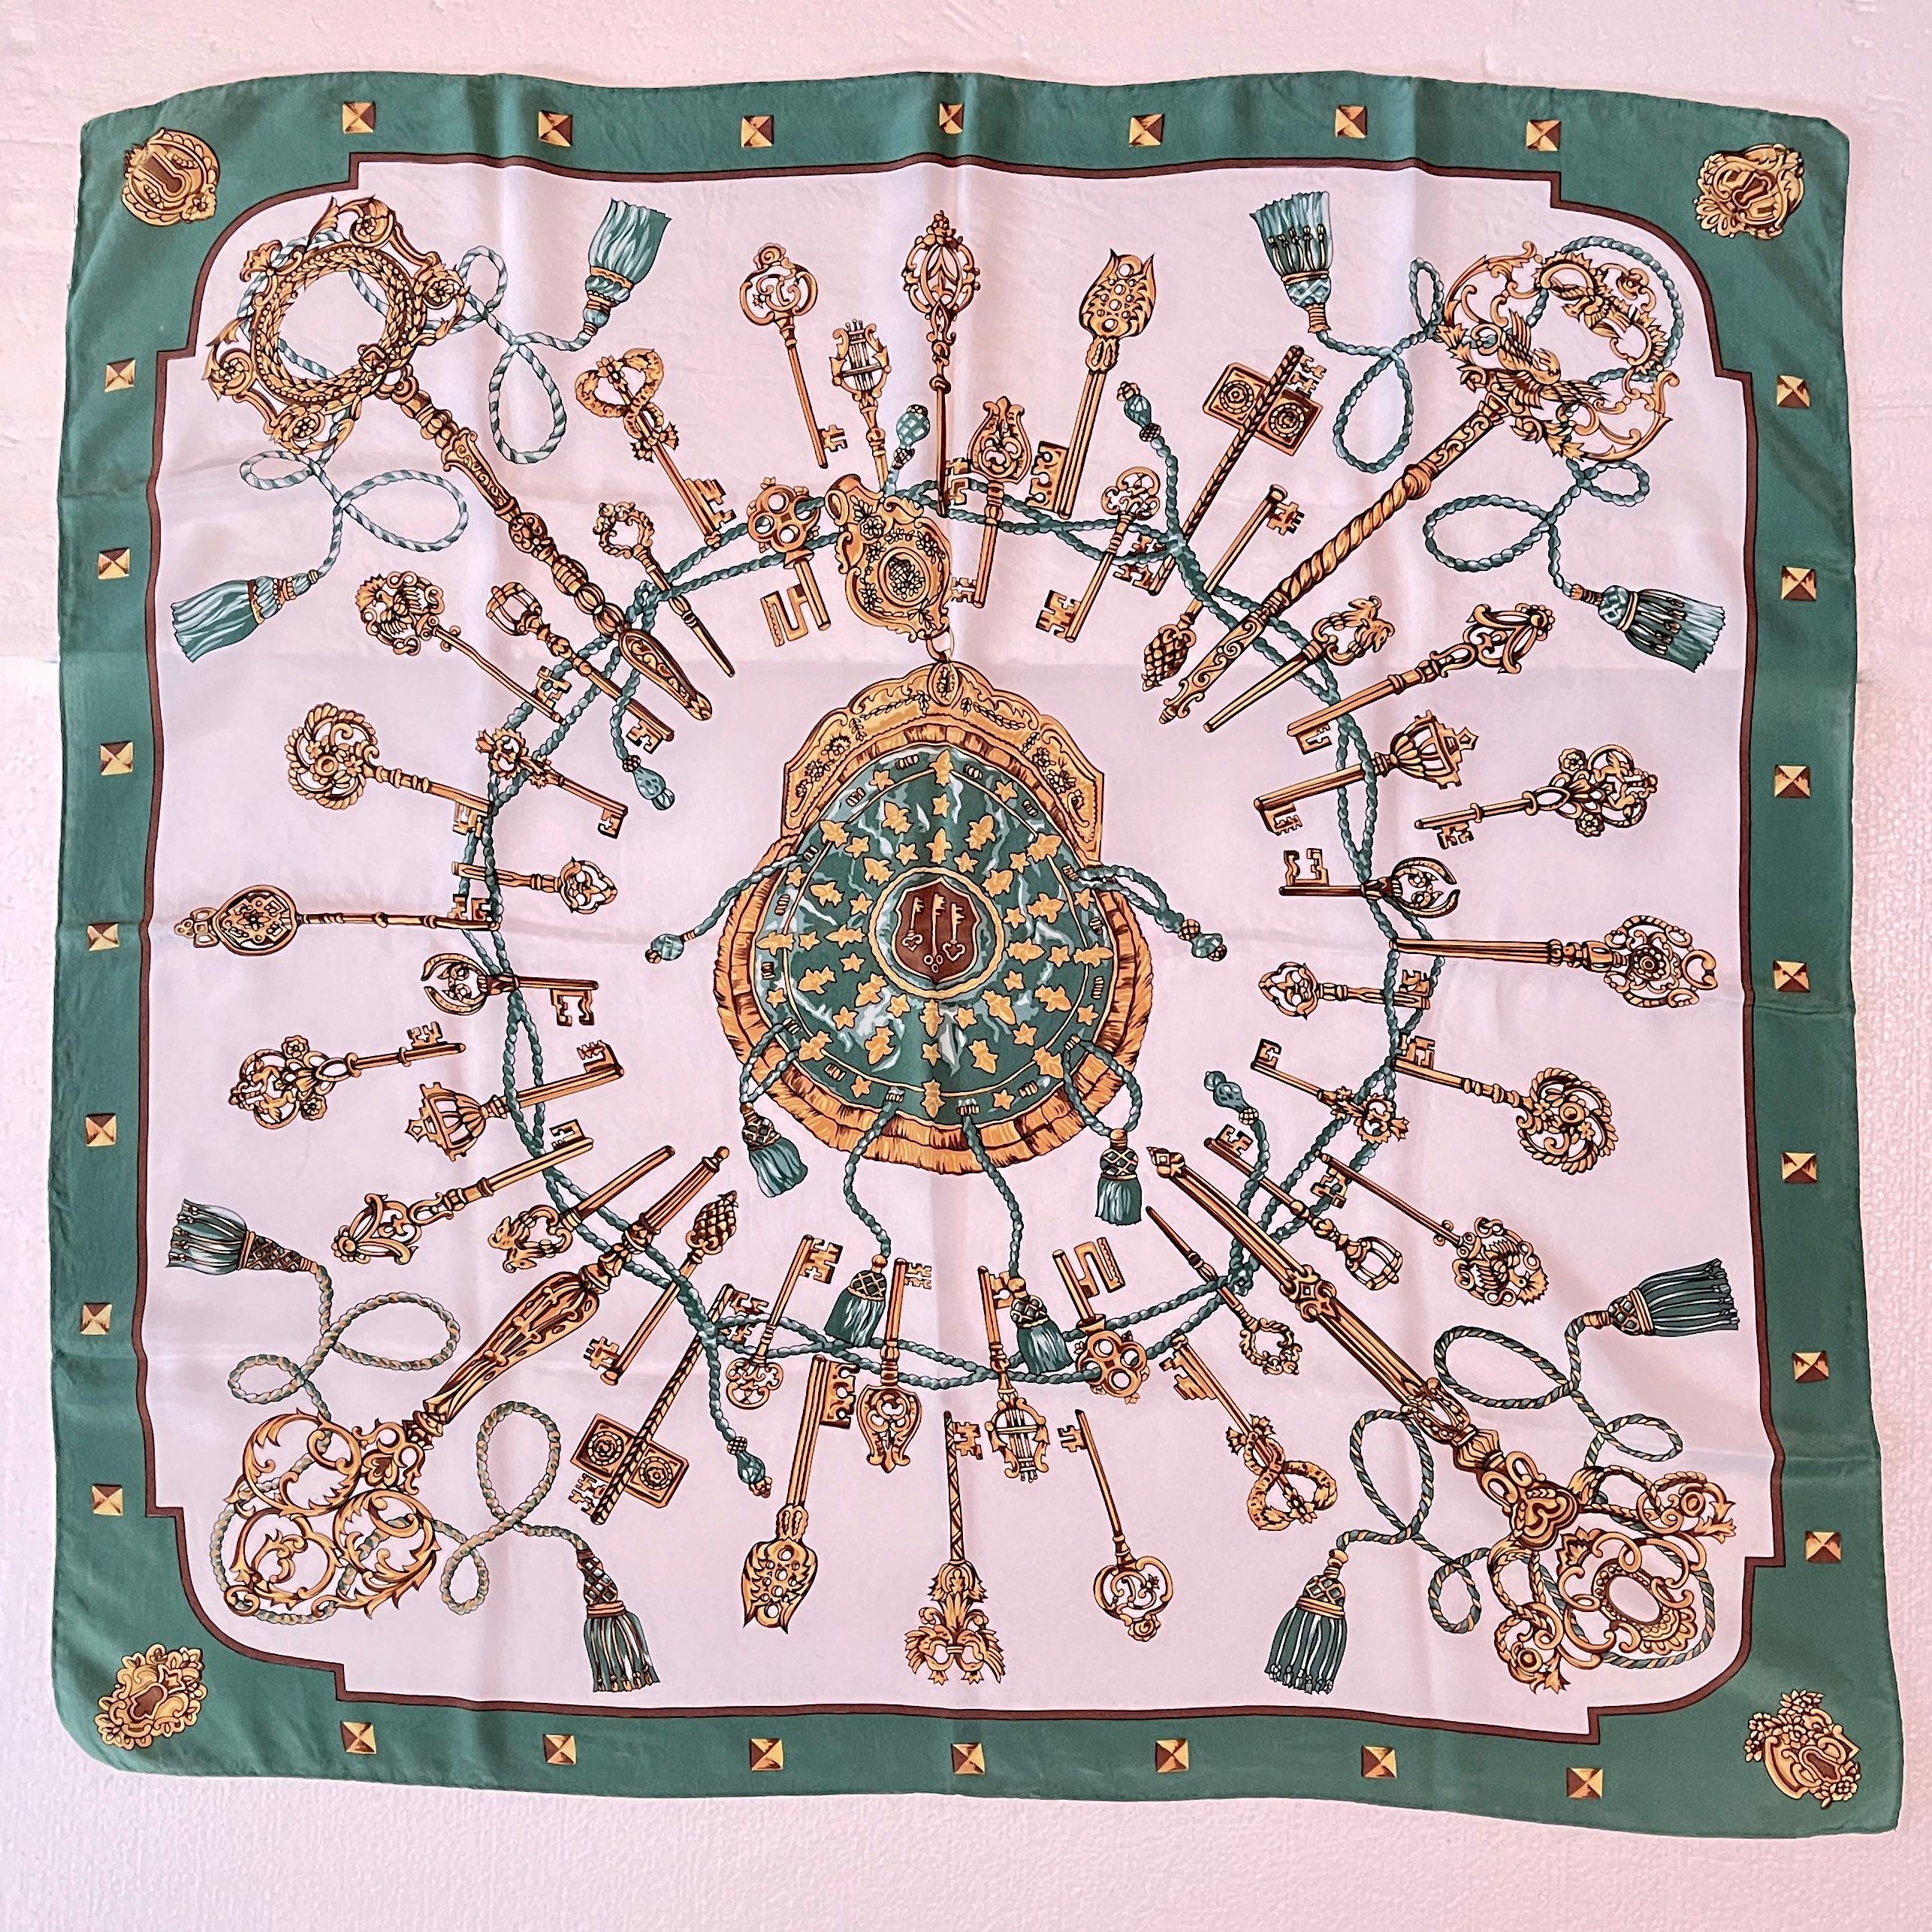 Vintage Hermès Silk Scarf, Les Clés designed by Caty Latham, first issued in 1965.

This ‘Keys’ scarf is an early issue with a Jade green border, and showing interlocking gold keys, rope, and tassels surrounding a central cartouche of a hanging